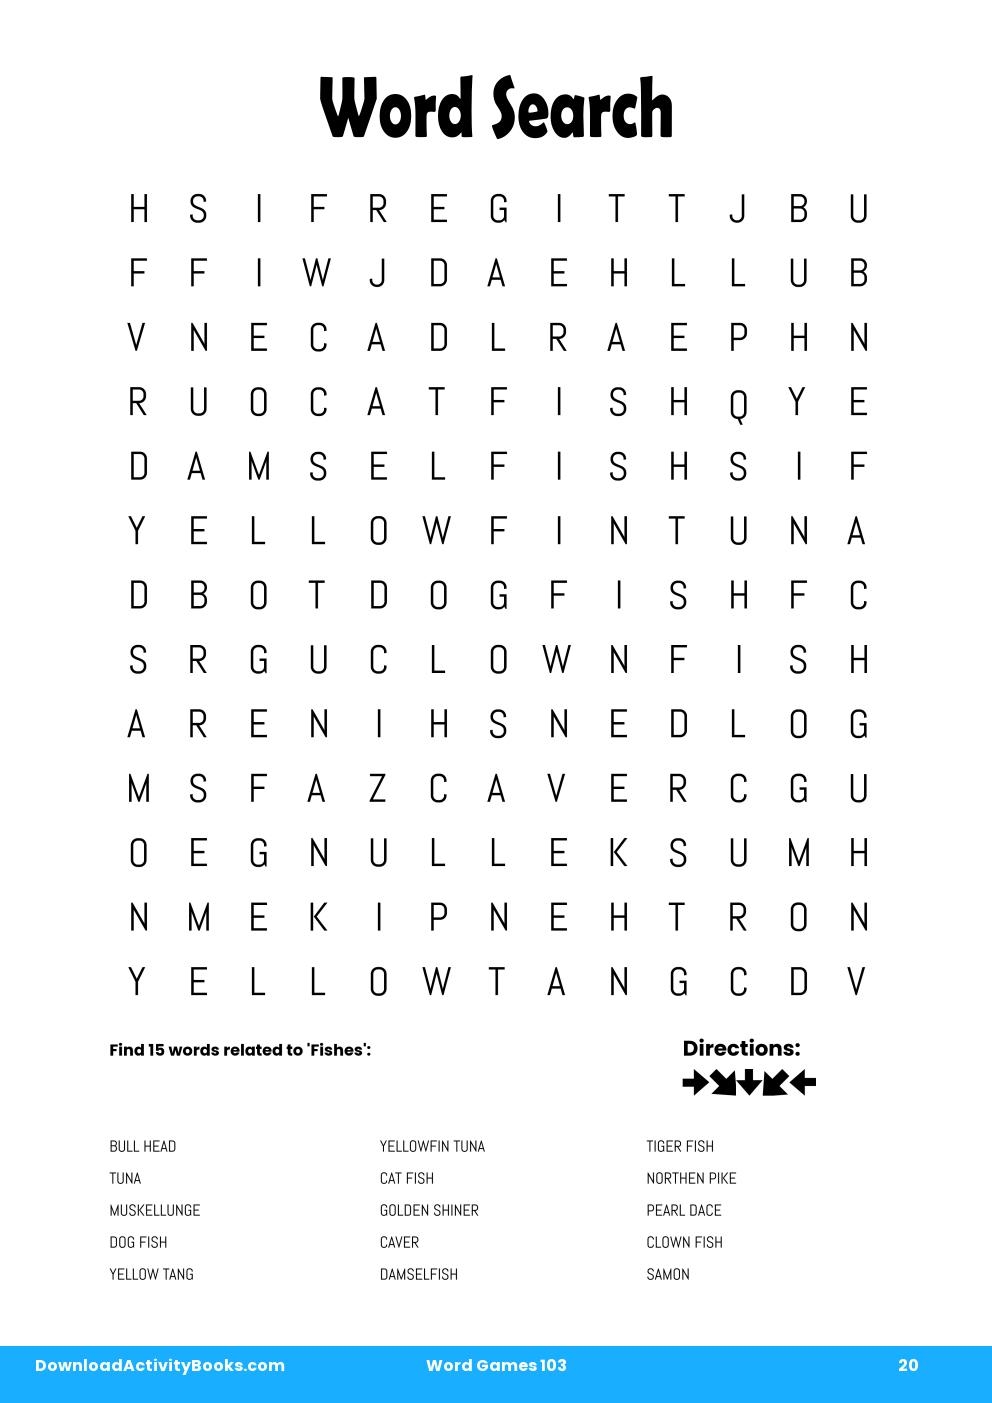 Word Search in Word Games 103